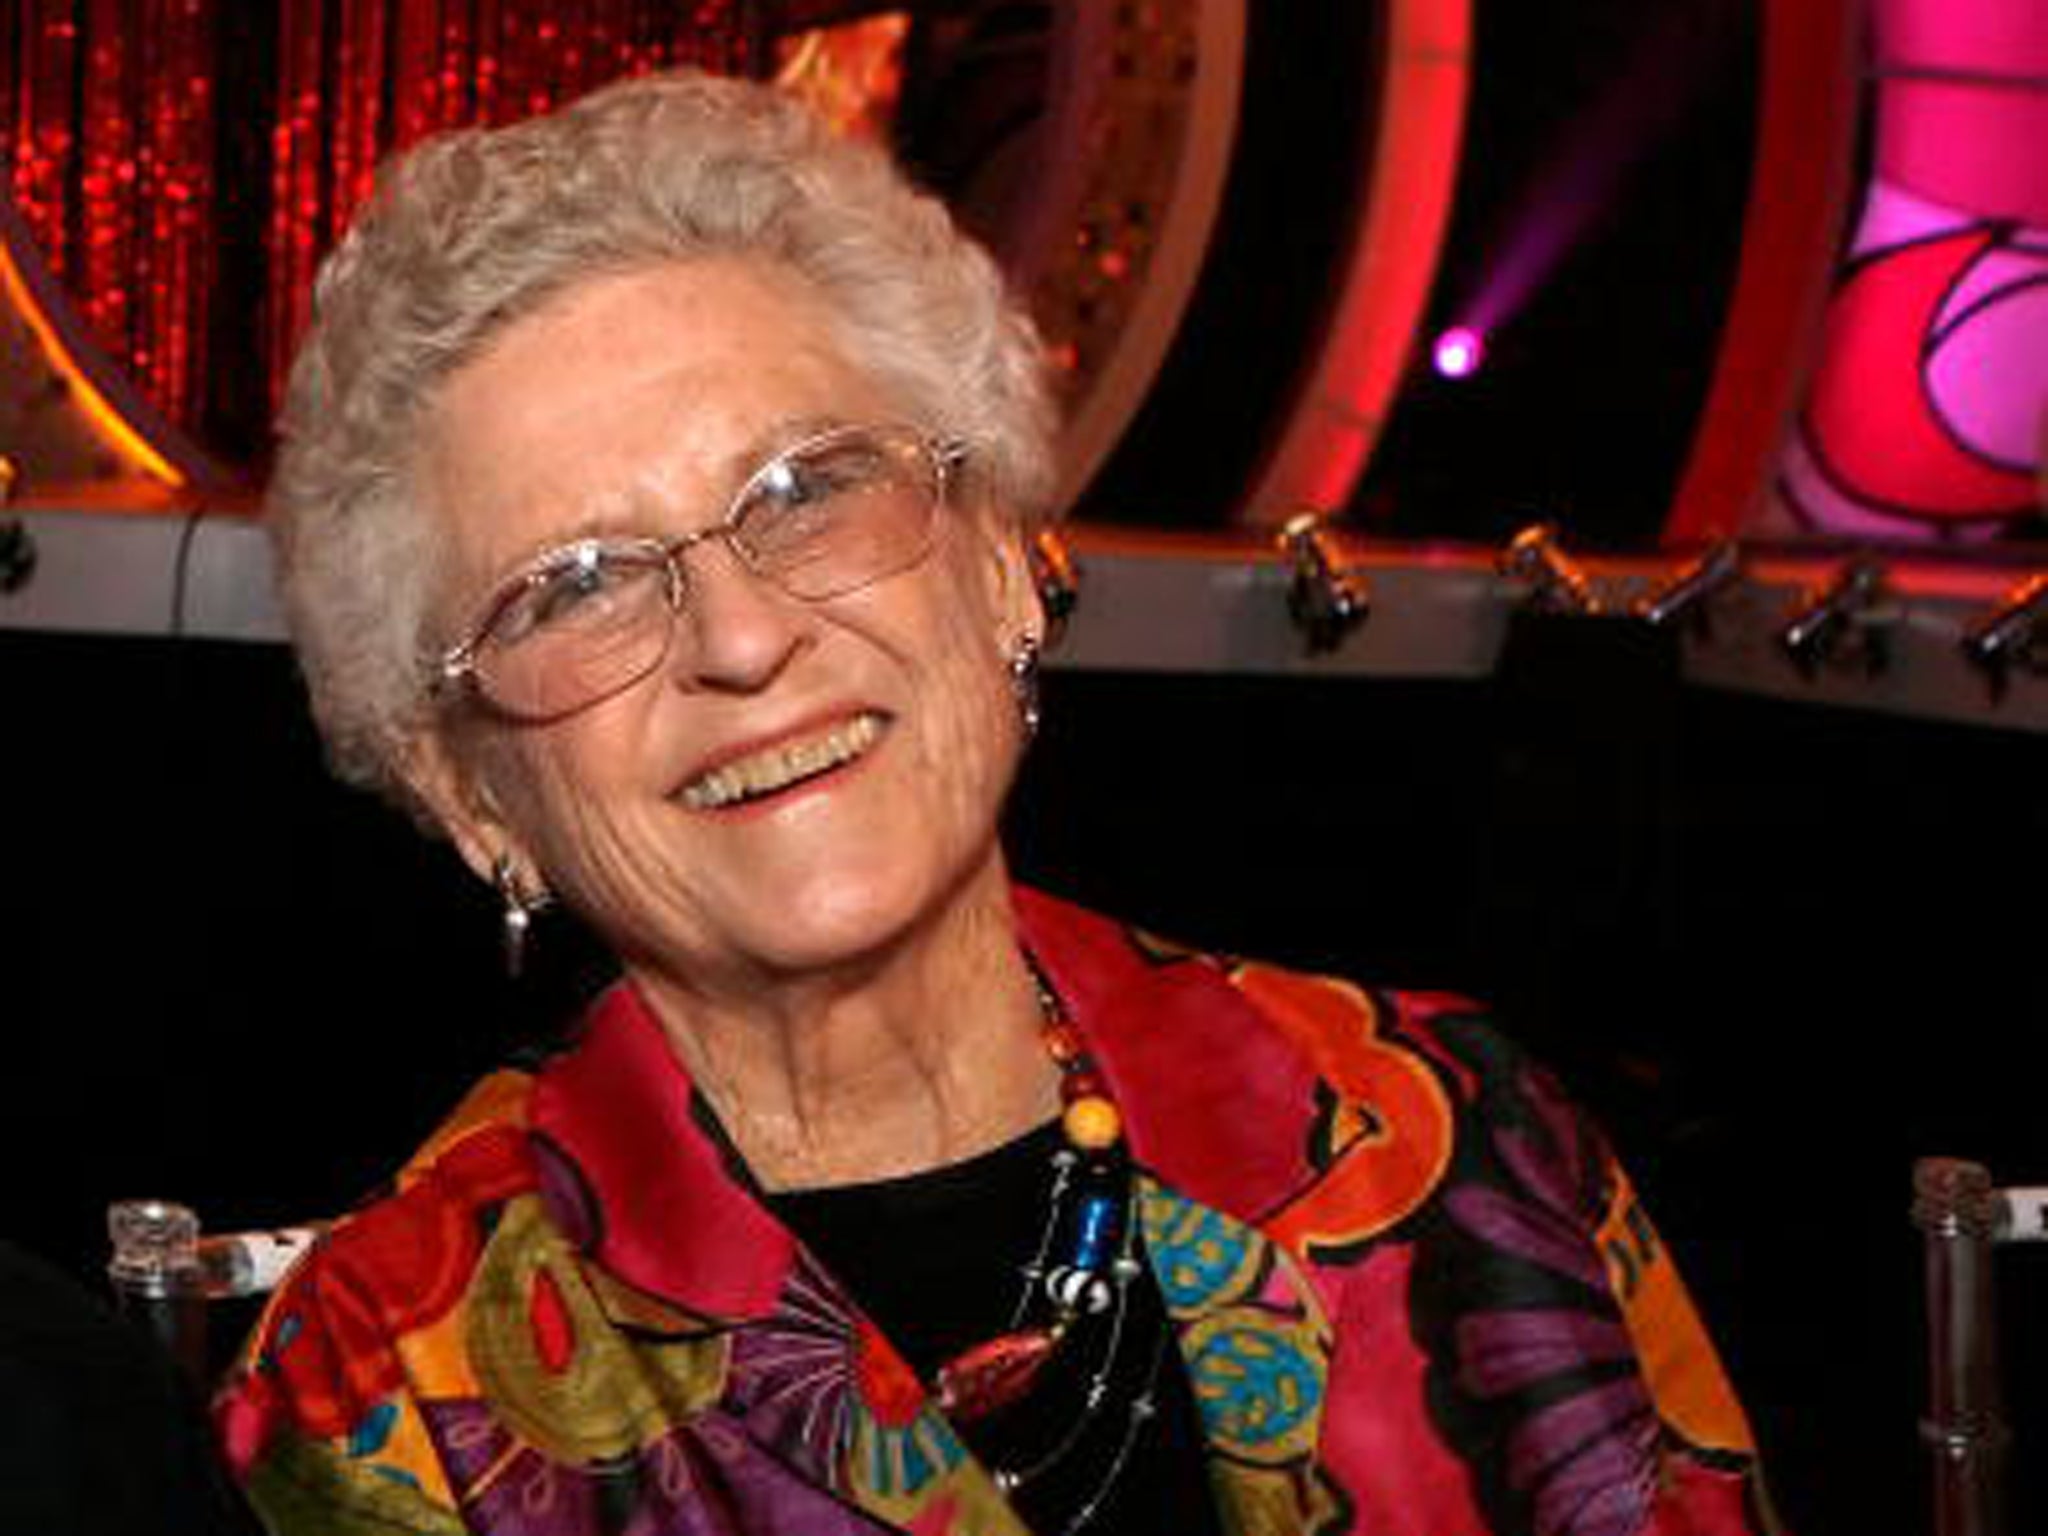 Actress Ann B. Davis poses for photos in the audience of the 5th Annual TV Land Awards held at Barker Hangar on April 14, 2007 in Santa Monica, California.